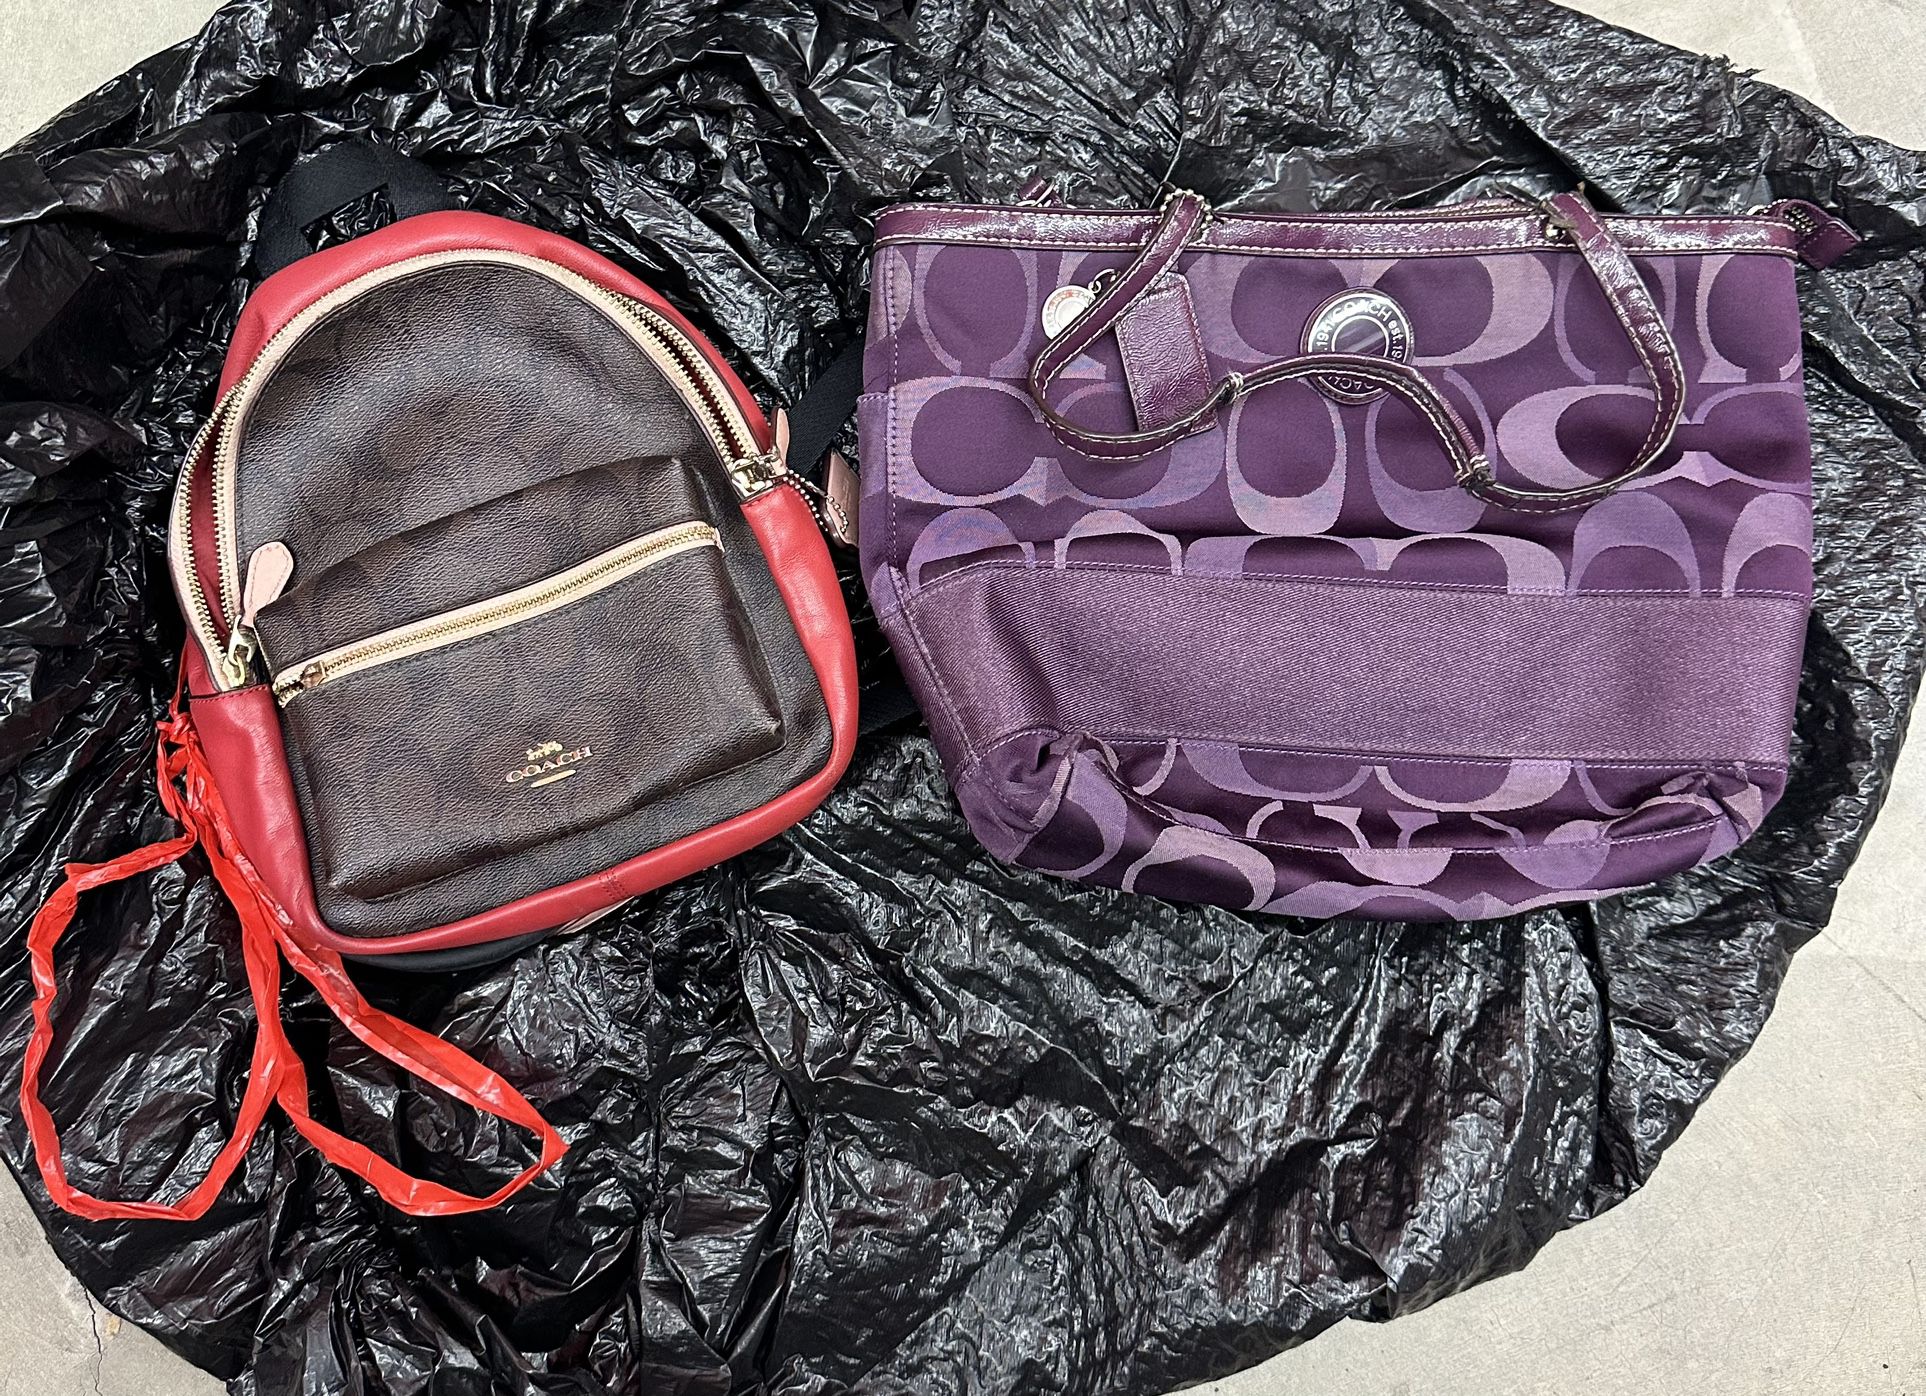 Coach Purse And Back Pack 